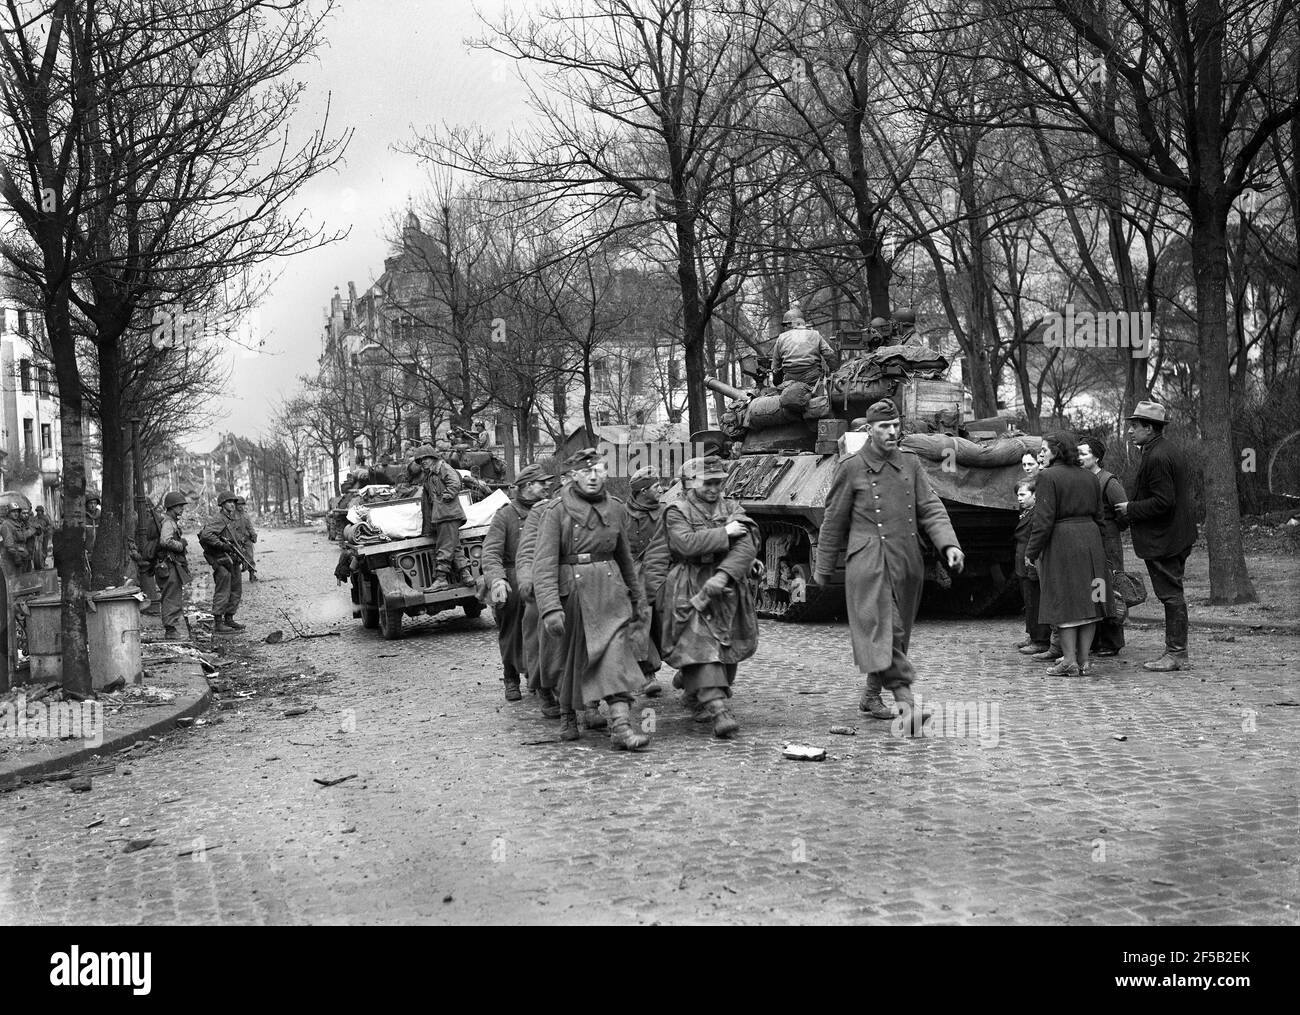 Cologne, Germany 1945 American troops escort captured German soldiers after they surrendered watched by local people during World War Two following heavy bombing of the city. WW2 second world war. german defeat allied victory Deutschland 1940s surrender Europe European history destruction Stock Photo